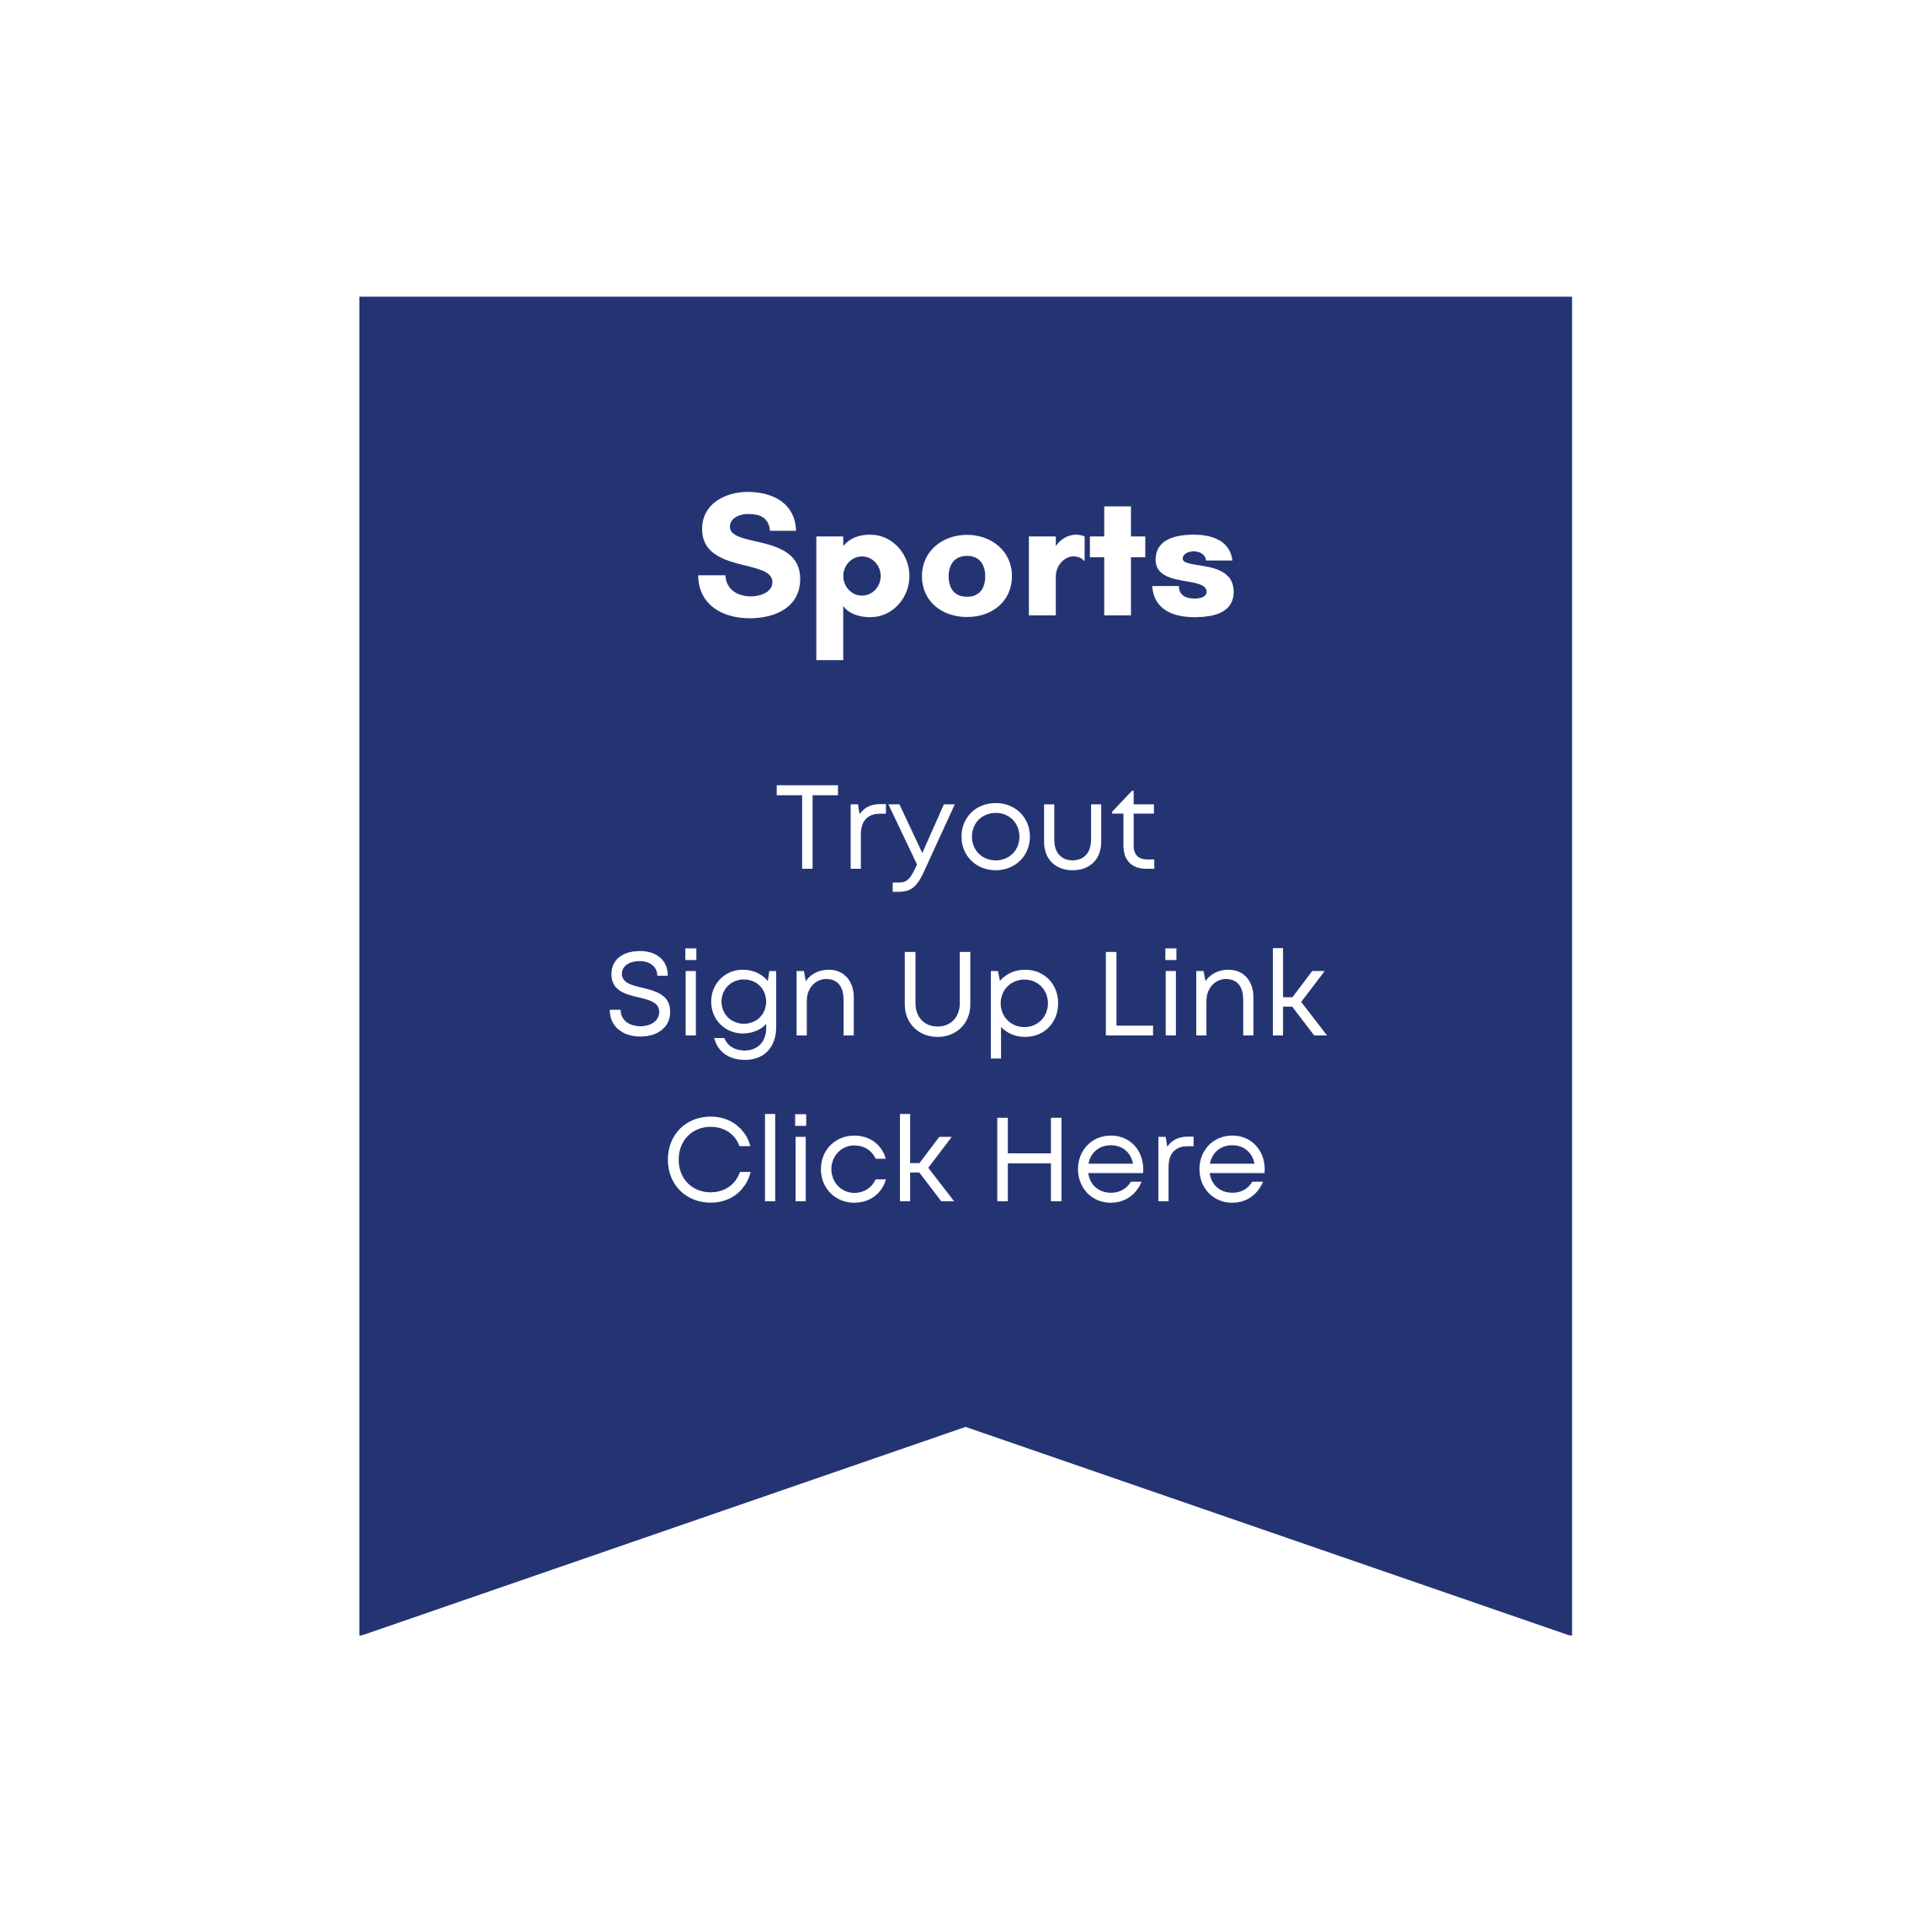 Sports tryout link